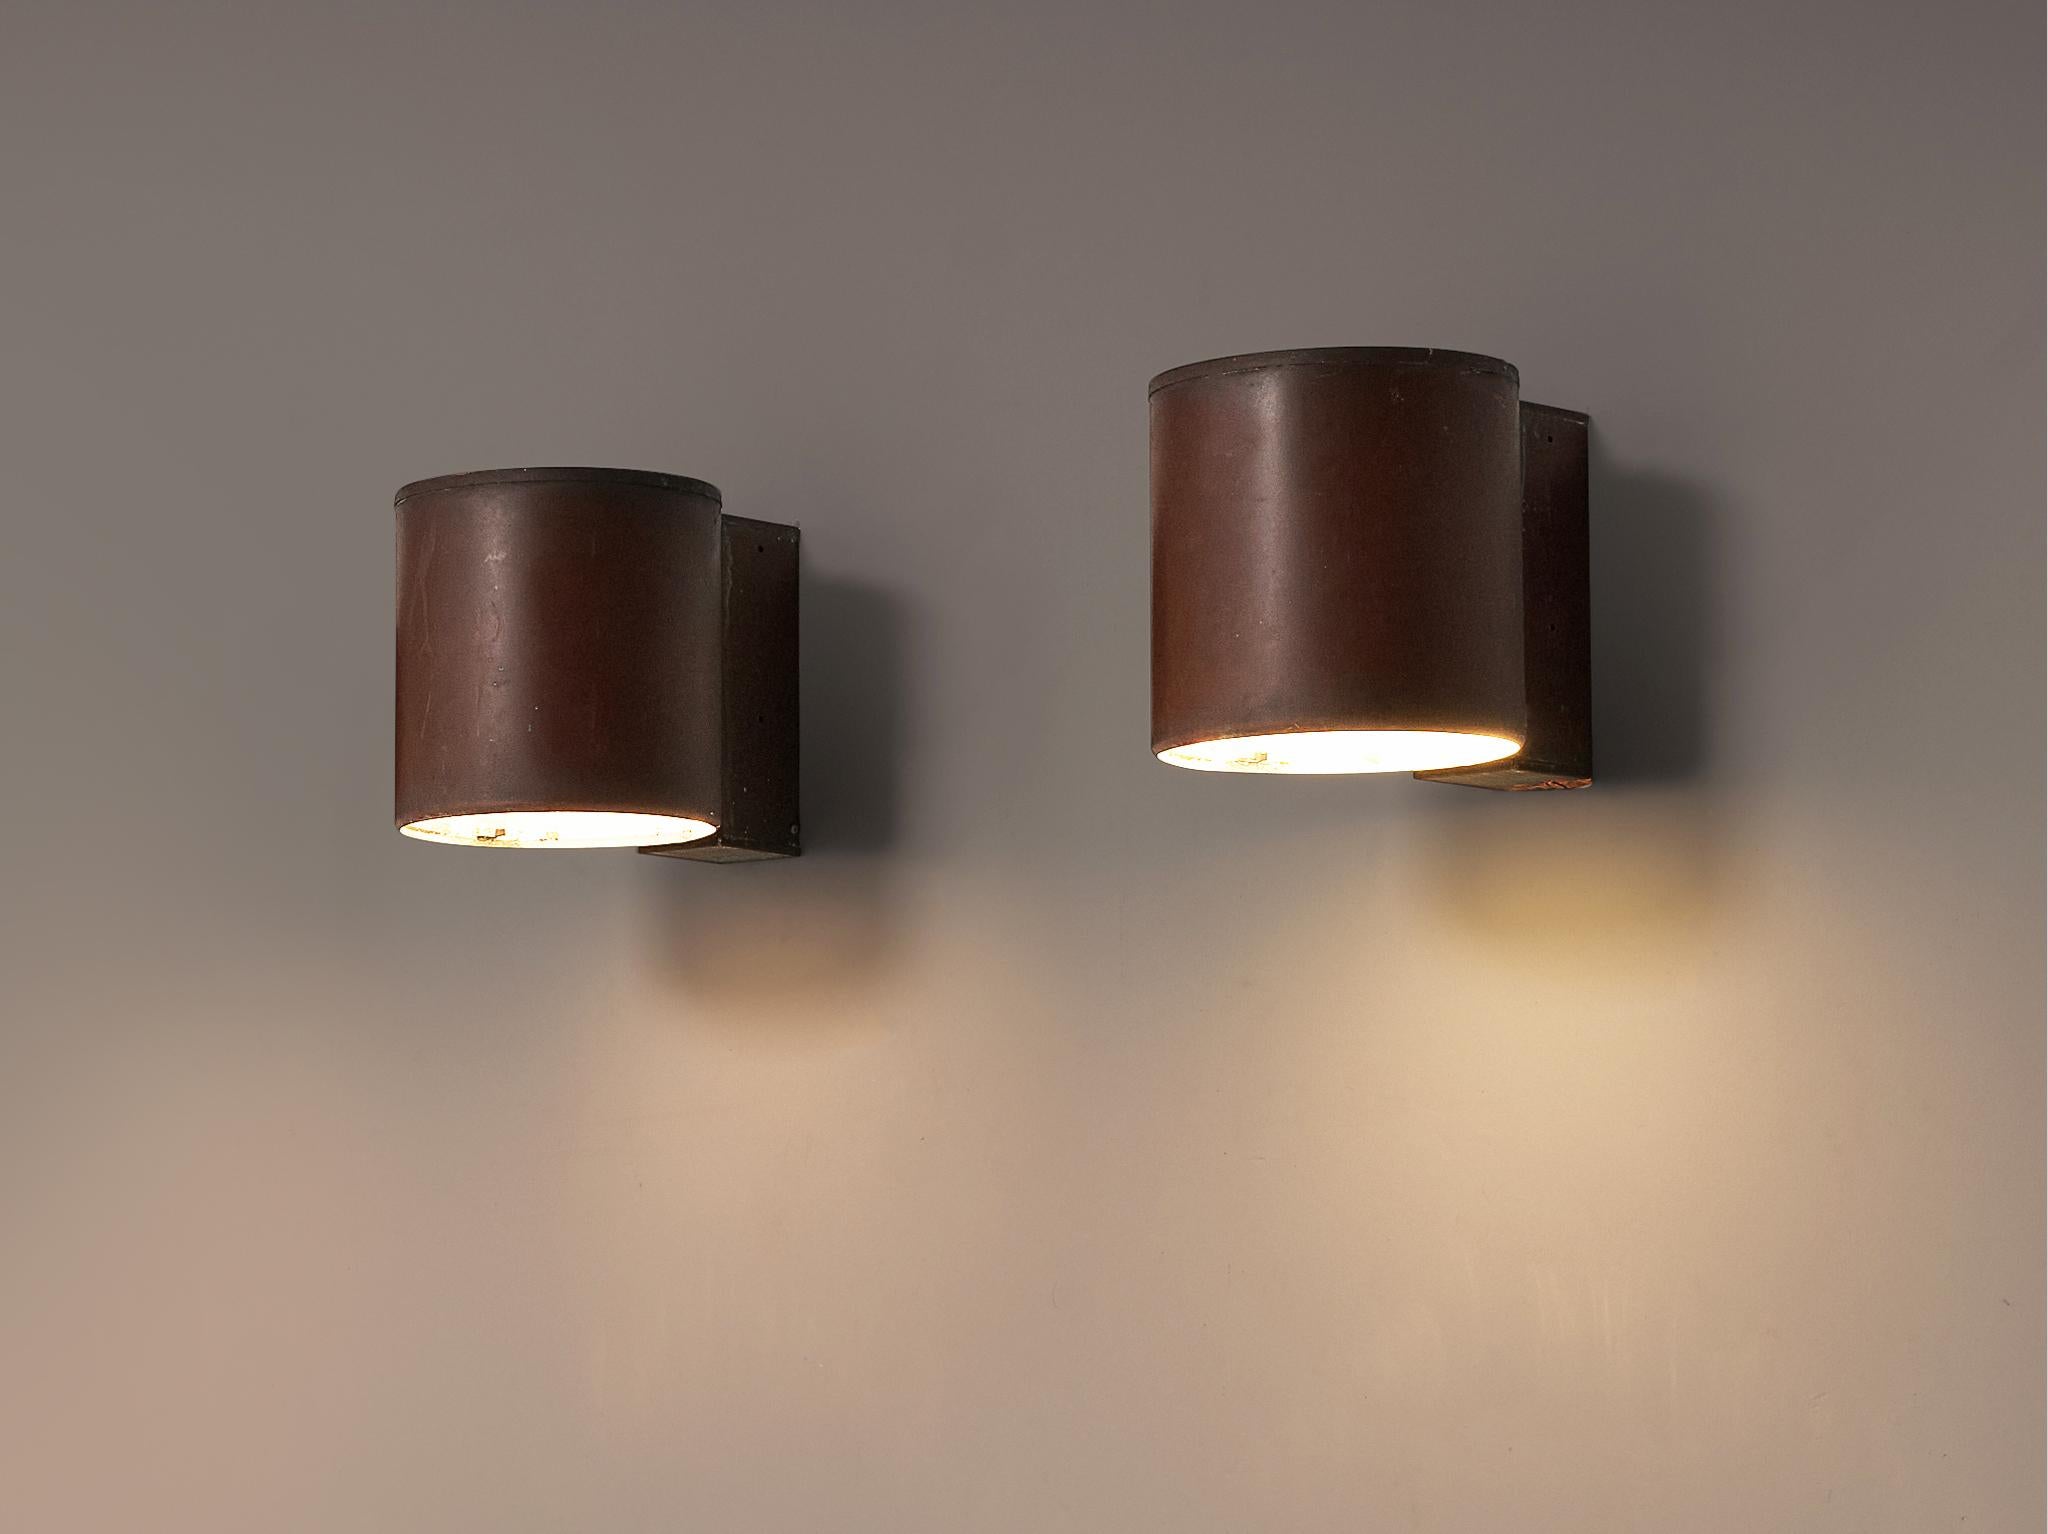 Falkenberg Belysning, large wall lamps, patinated copper, Sweden, 1960s

Grand Swedish wall lights in patinated copper. The cylindric shade directs the light downwards. The authentic look of the patinated copper creates a vividly play of different